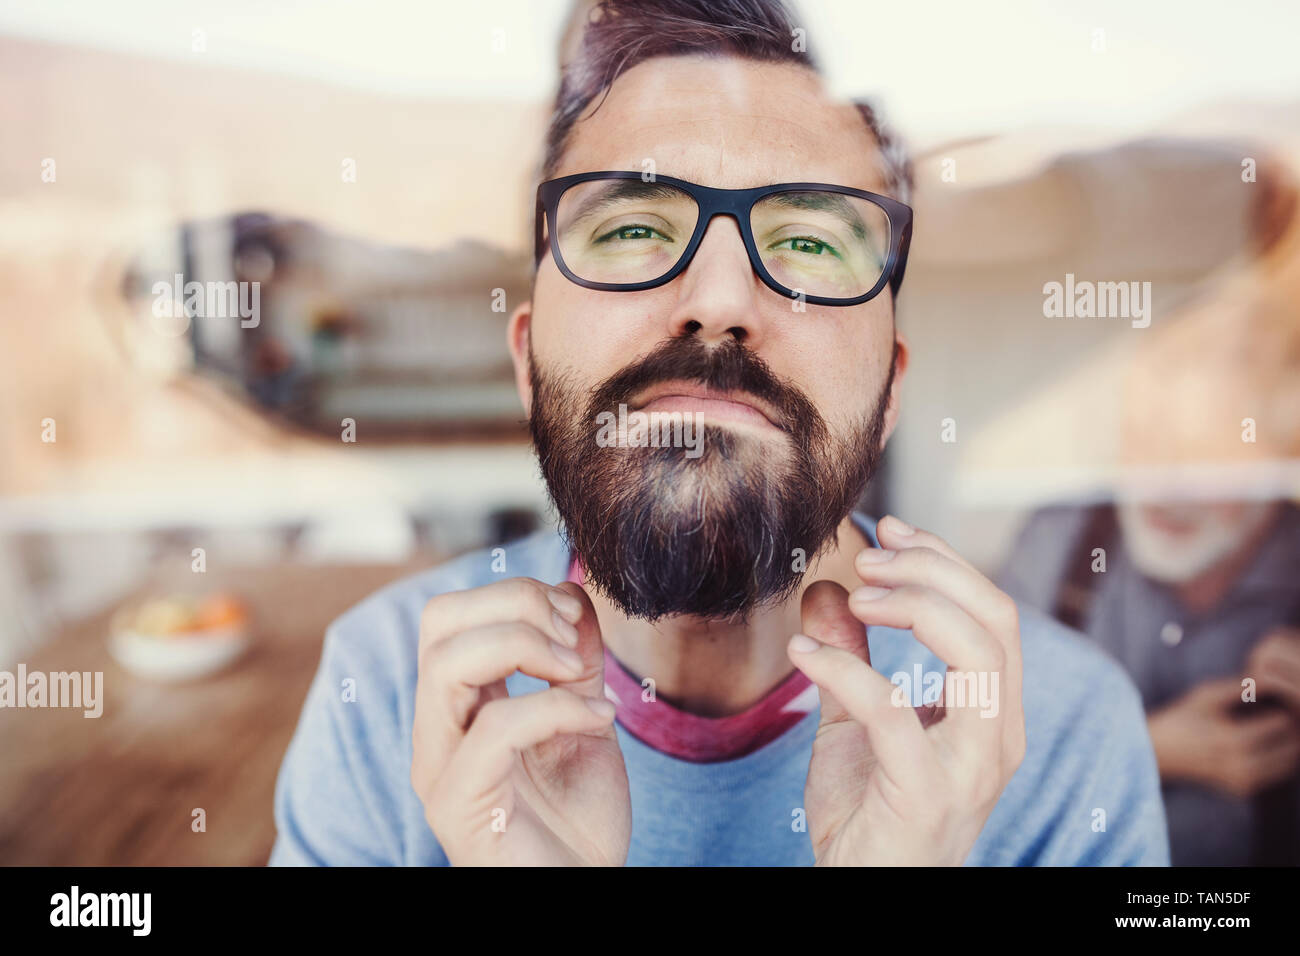 A portrait of a man standing indoors at home, shot through glass. Stock Photo